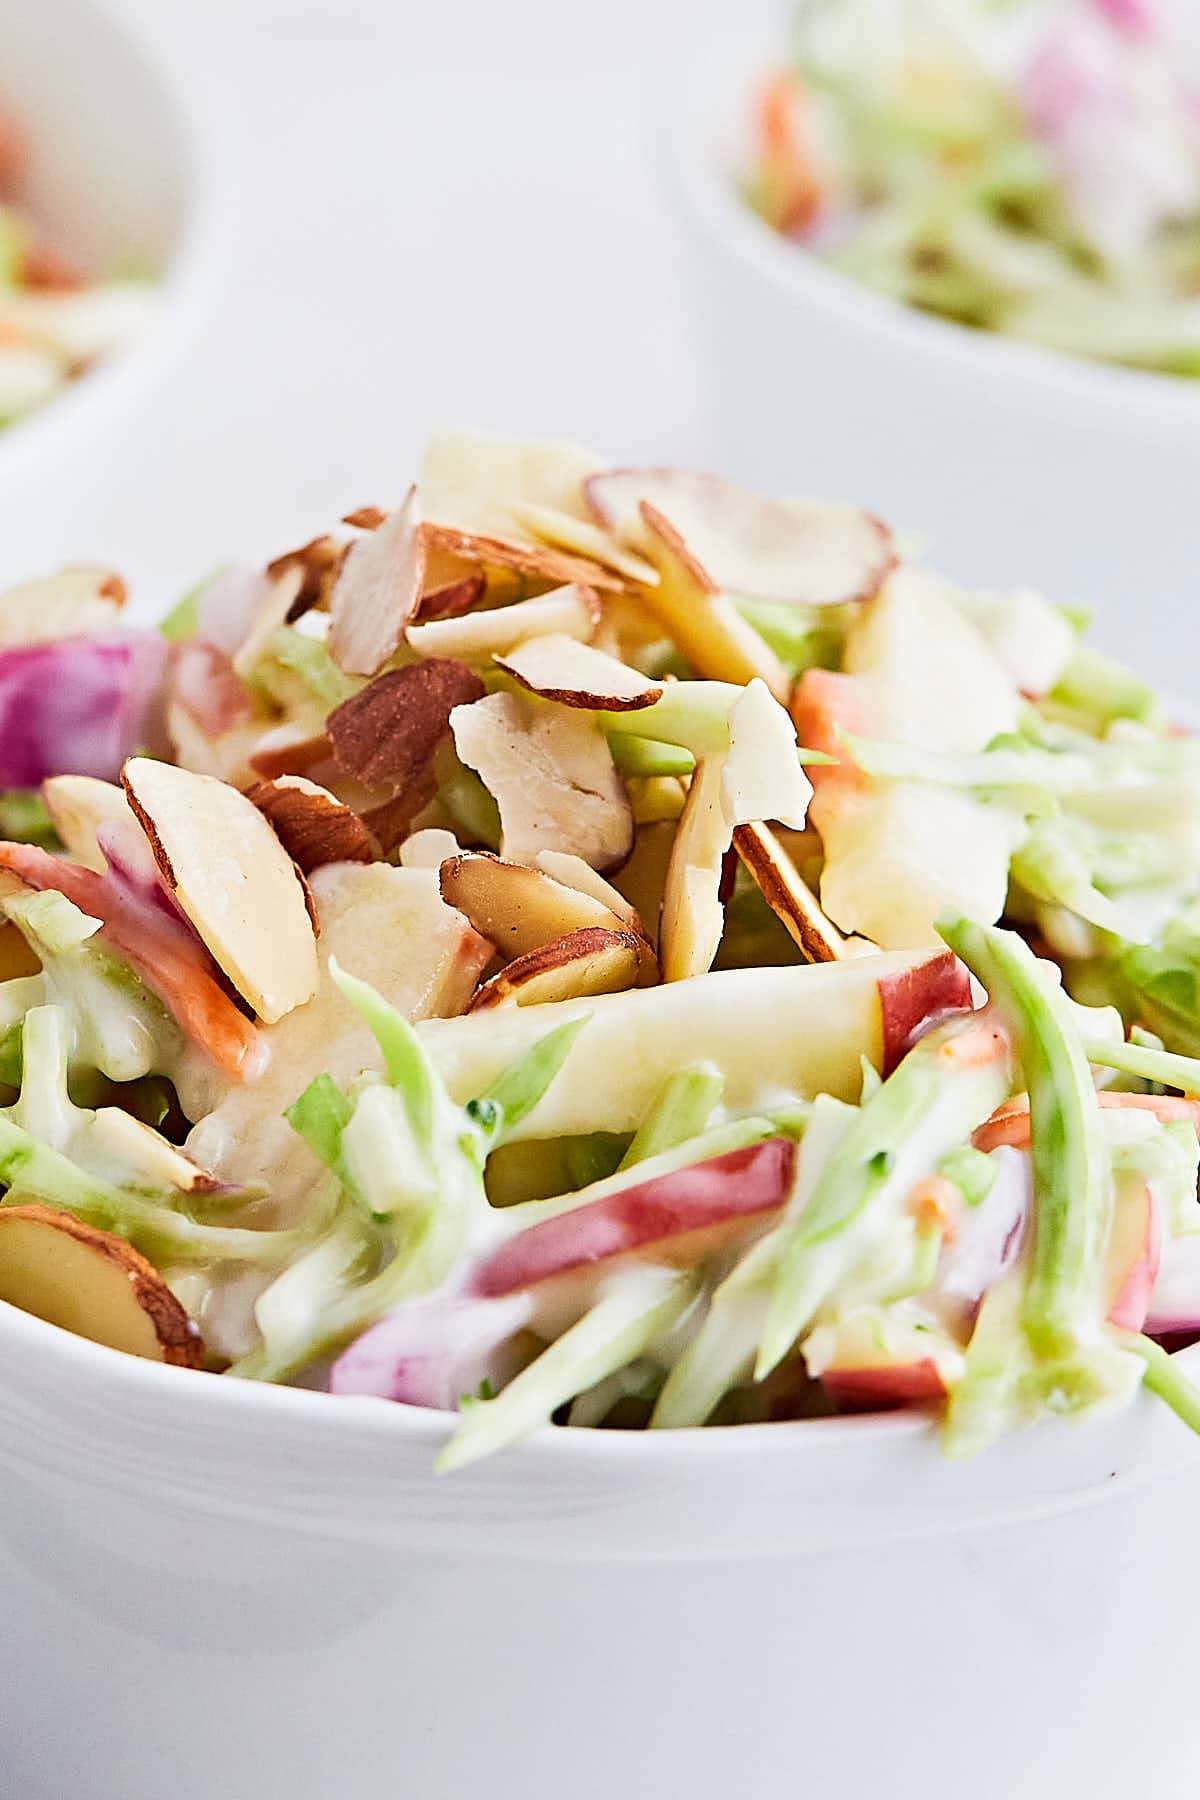 Creamy Broccoli Slaw with Apples and Almonds - Cheerful Cook